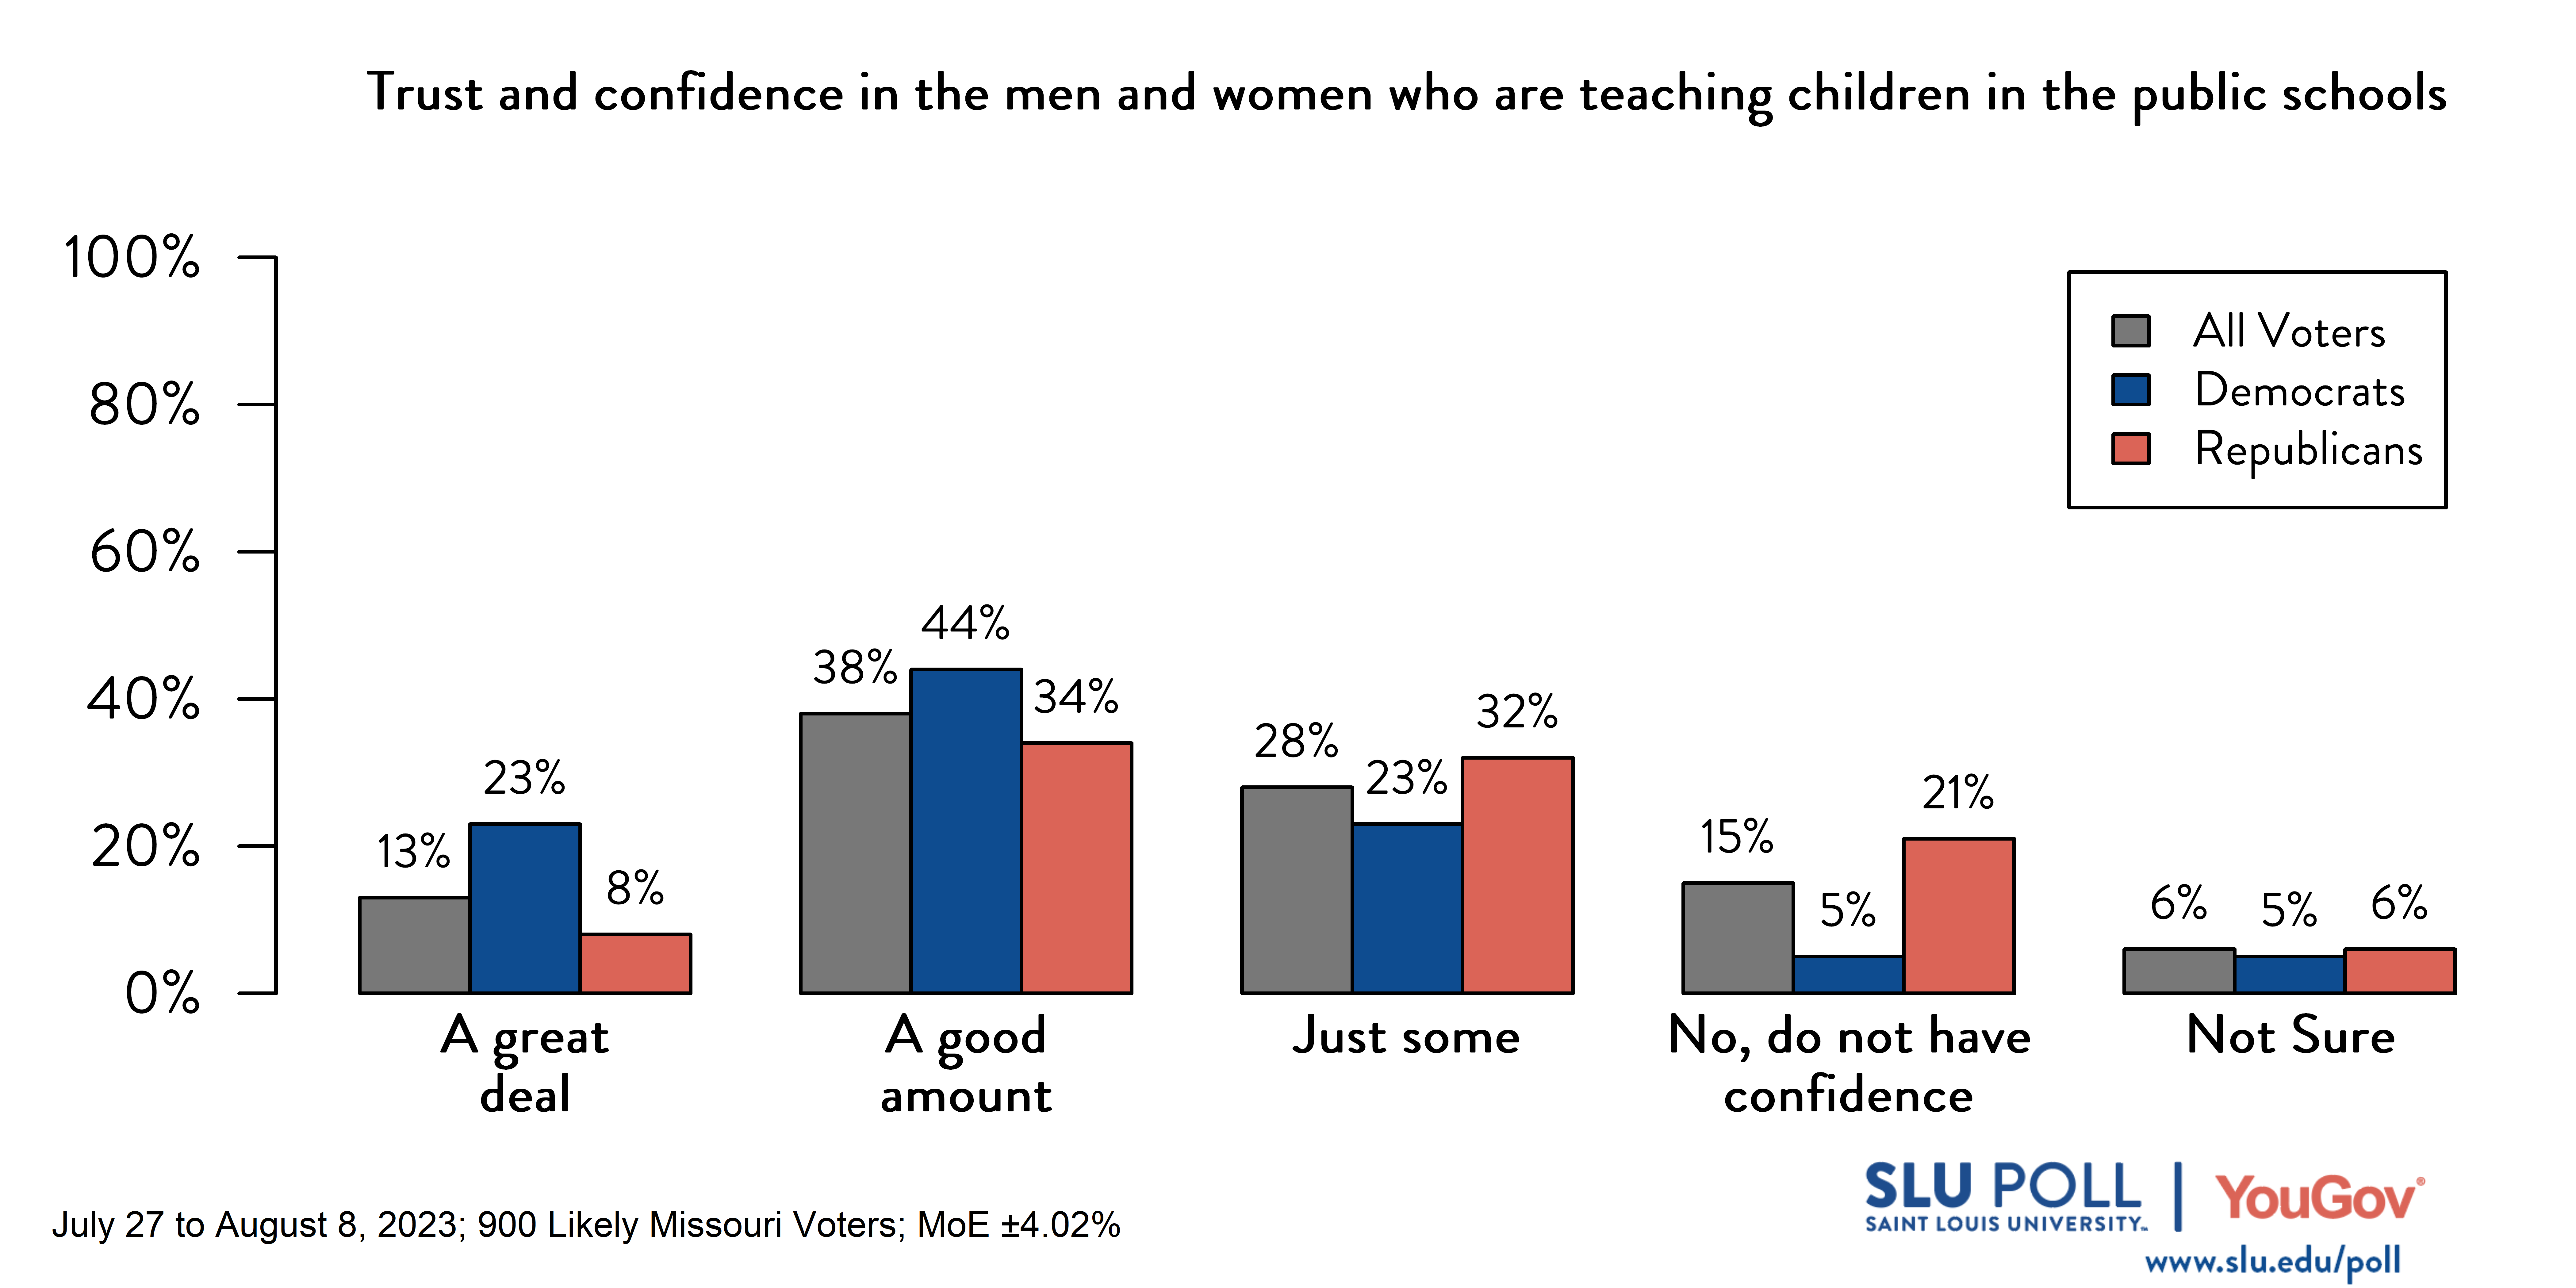 Likely voters' responses to 'Do you have trust and confidence in the men and women who are teaching children in the public schools?': 13% A great deal, 38% A good amount, 28% Just some, 15% No, do not have confidence, and 6% Not sure. Democratic voters' responses: ' 23% A great deal, 44% A good amount, 23% Just some, 5% No, do not have confidence, and 5% Not sure. Republican voters' responses: 8% A great deal, 34% A good amount, 32% Just some, 21% No, do not have confidence, and 6% Not sure.